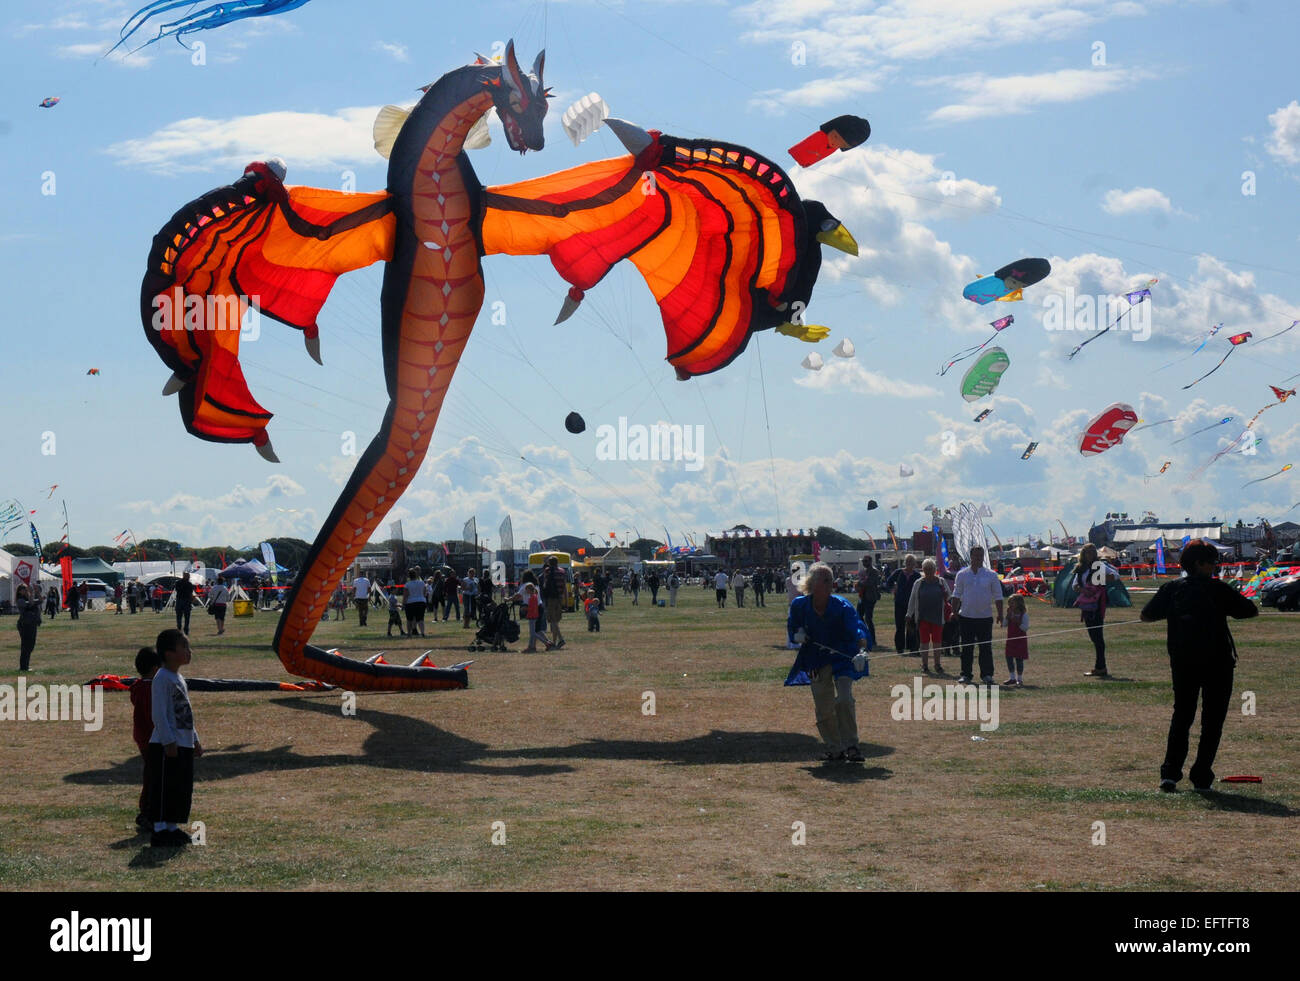 A dragon looks menacing as it frlies over the seafront at Southsea, Hants at the annual Kite Festival. Pic Mike Walker, Mike Wal Stock Photo